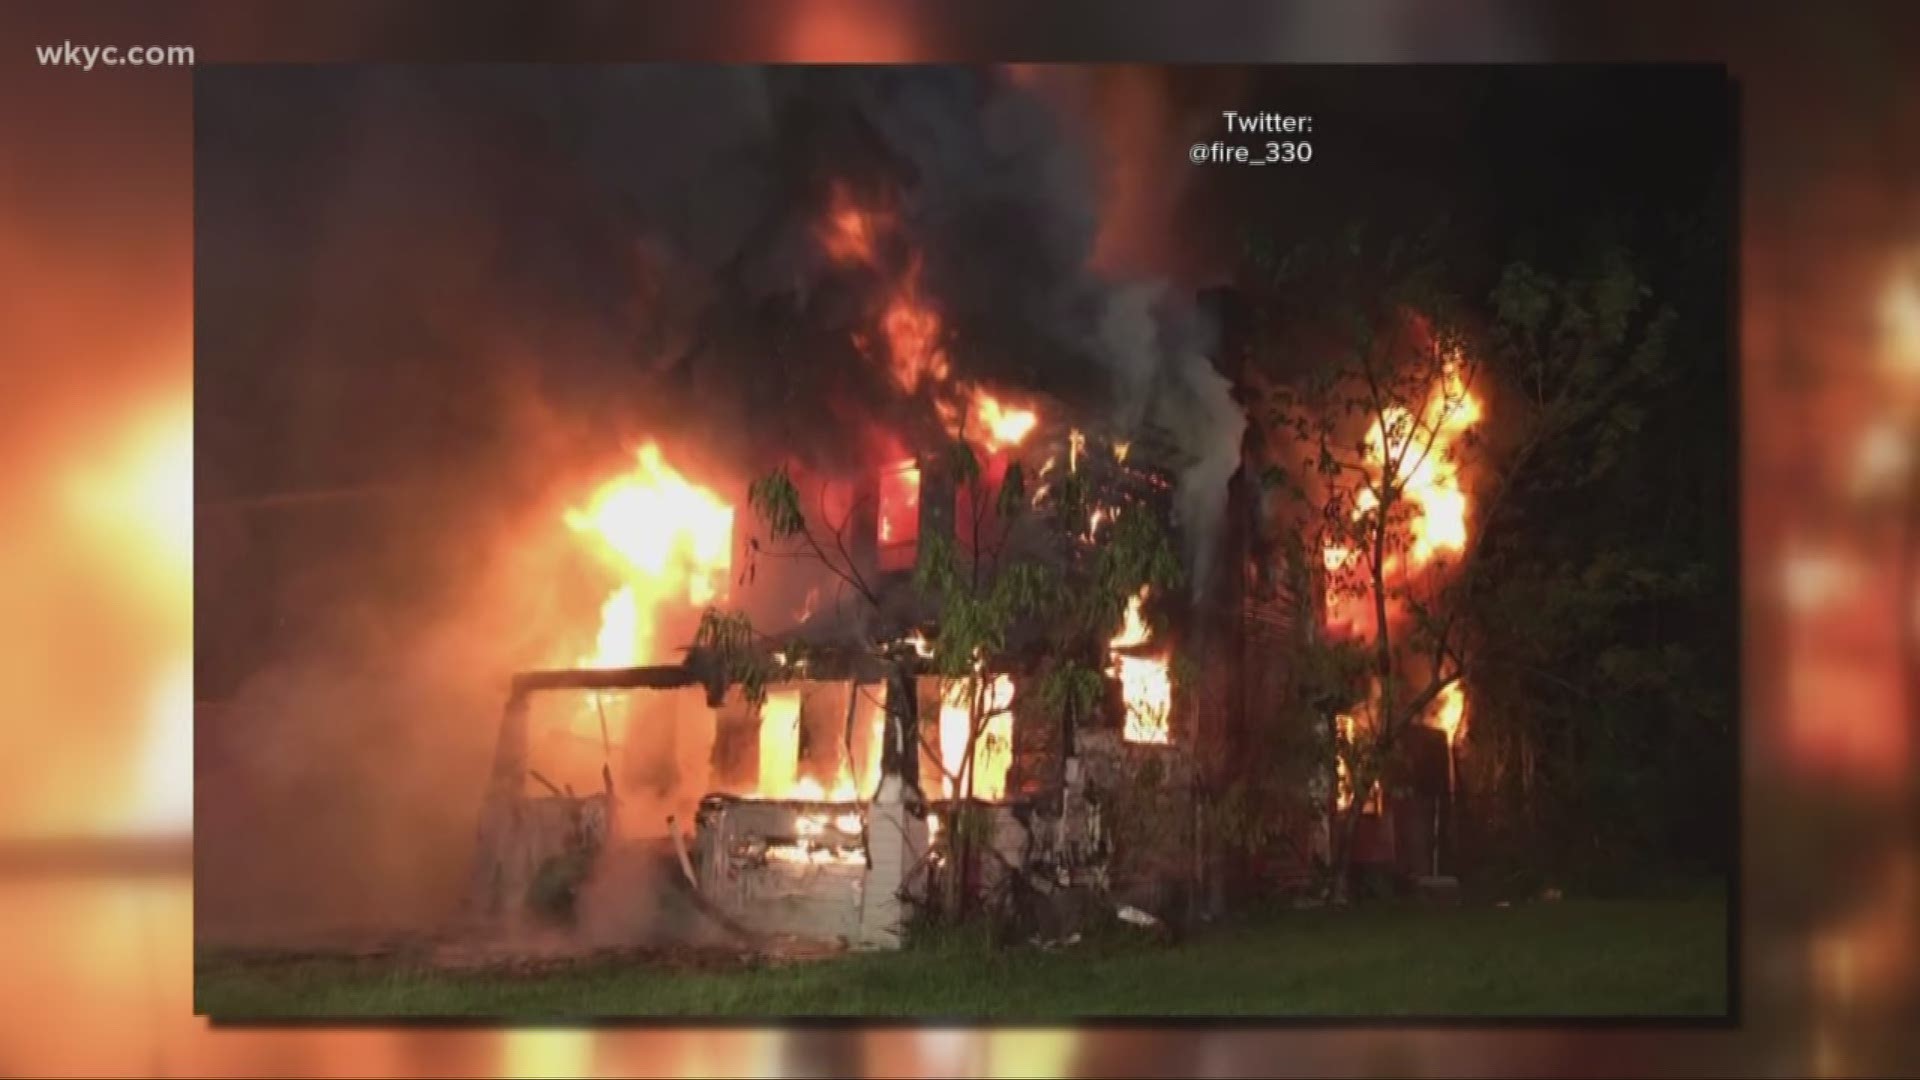 Officials investigating akron house fire